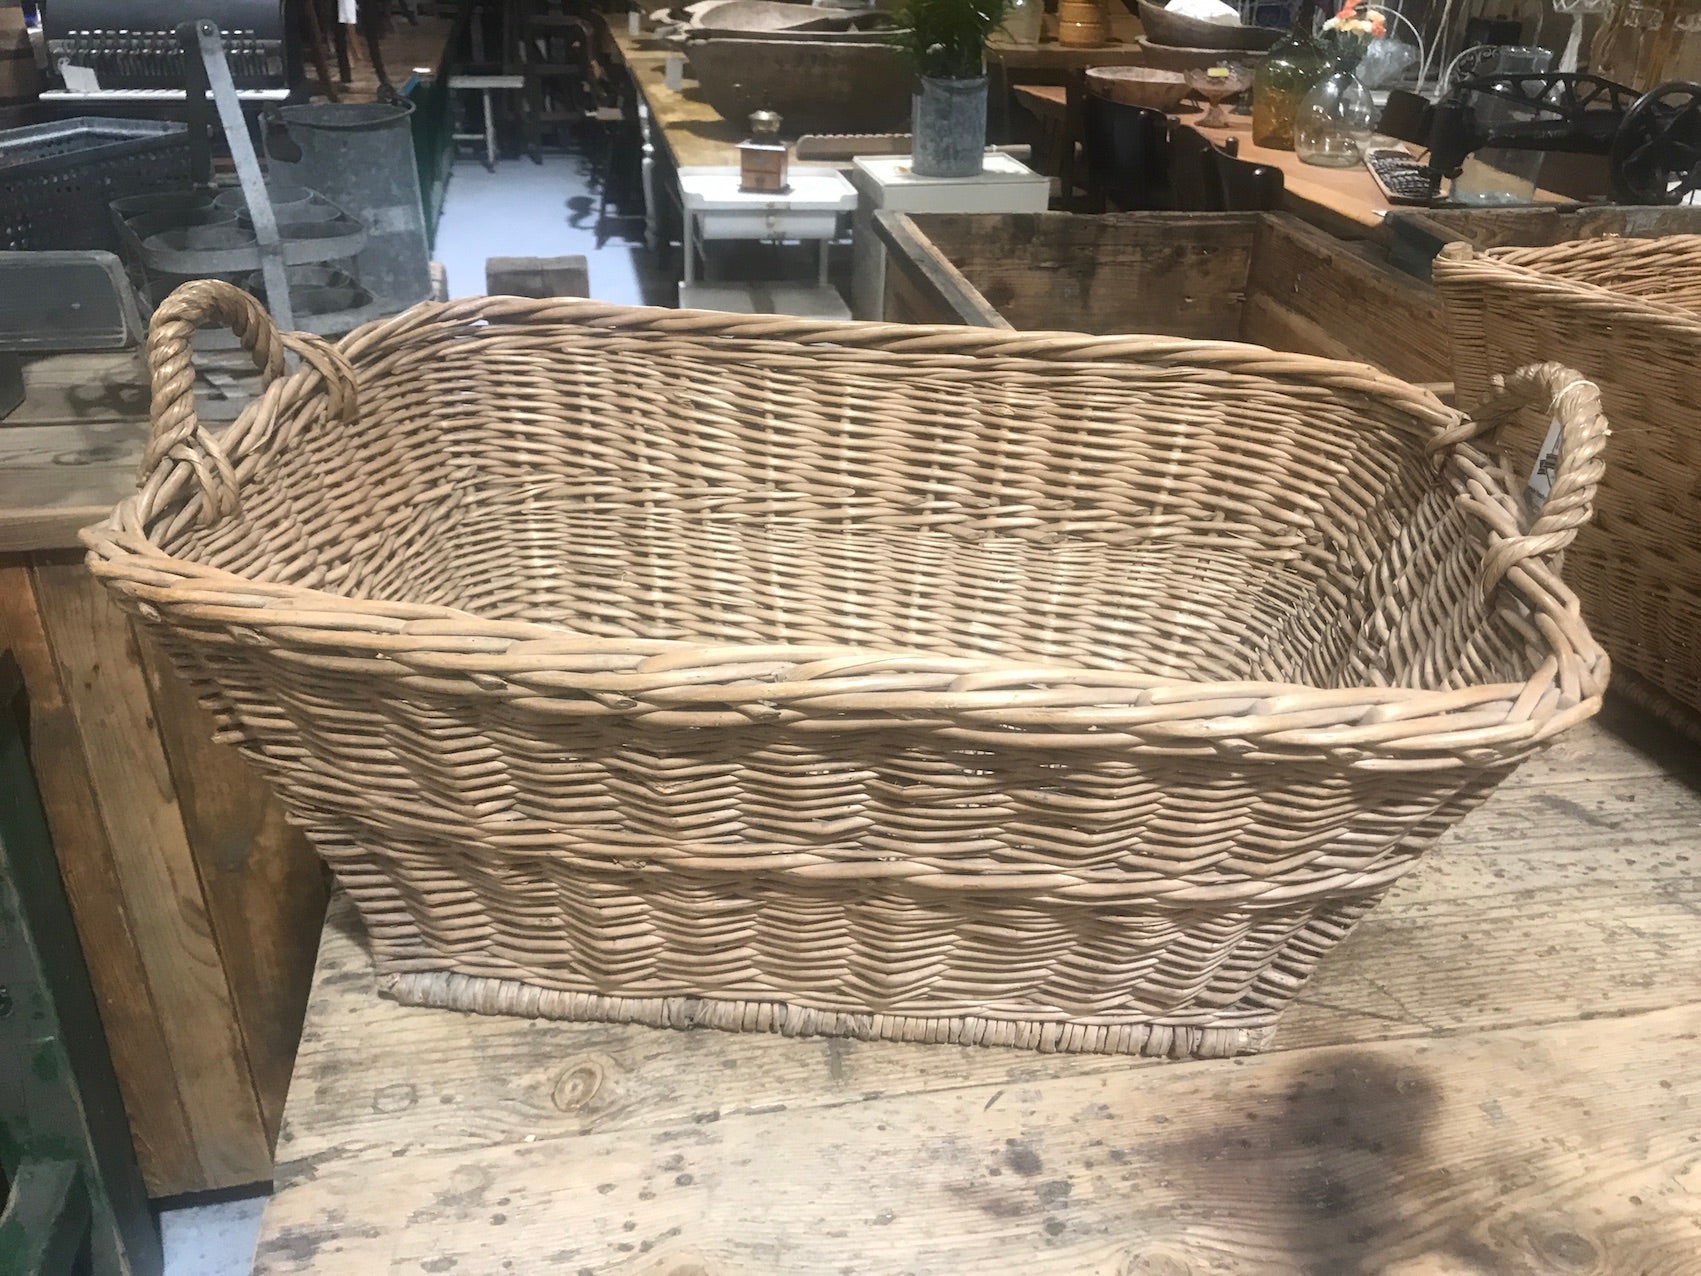 Vintage industrial French cane willow bakers basket  #2562/2